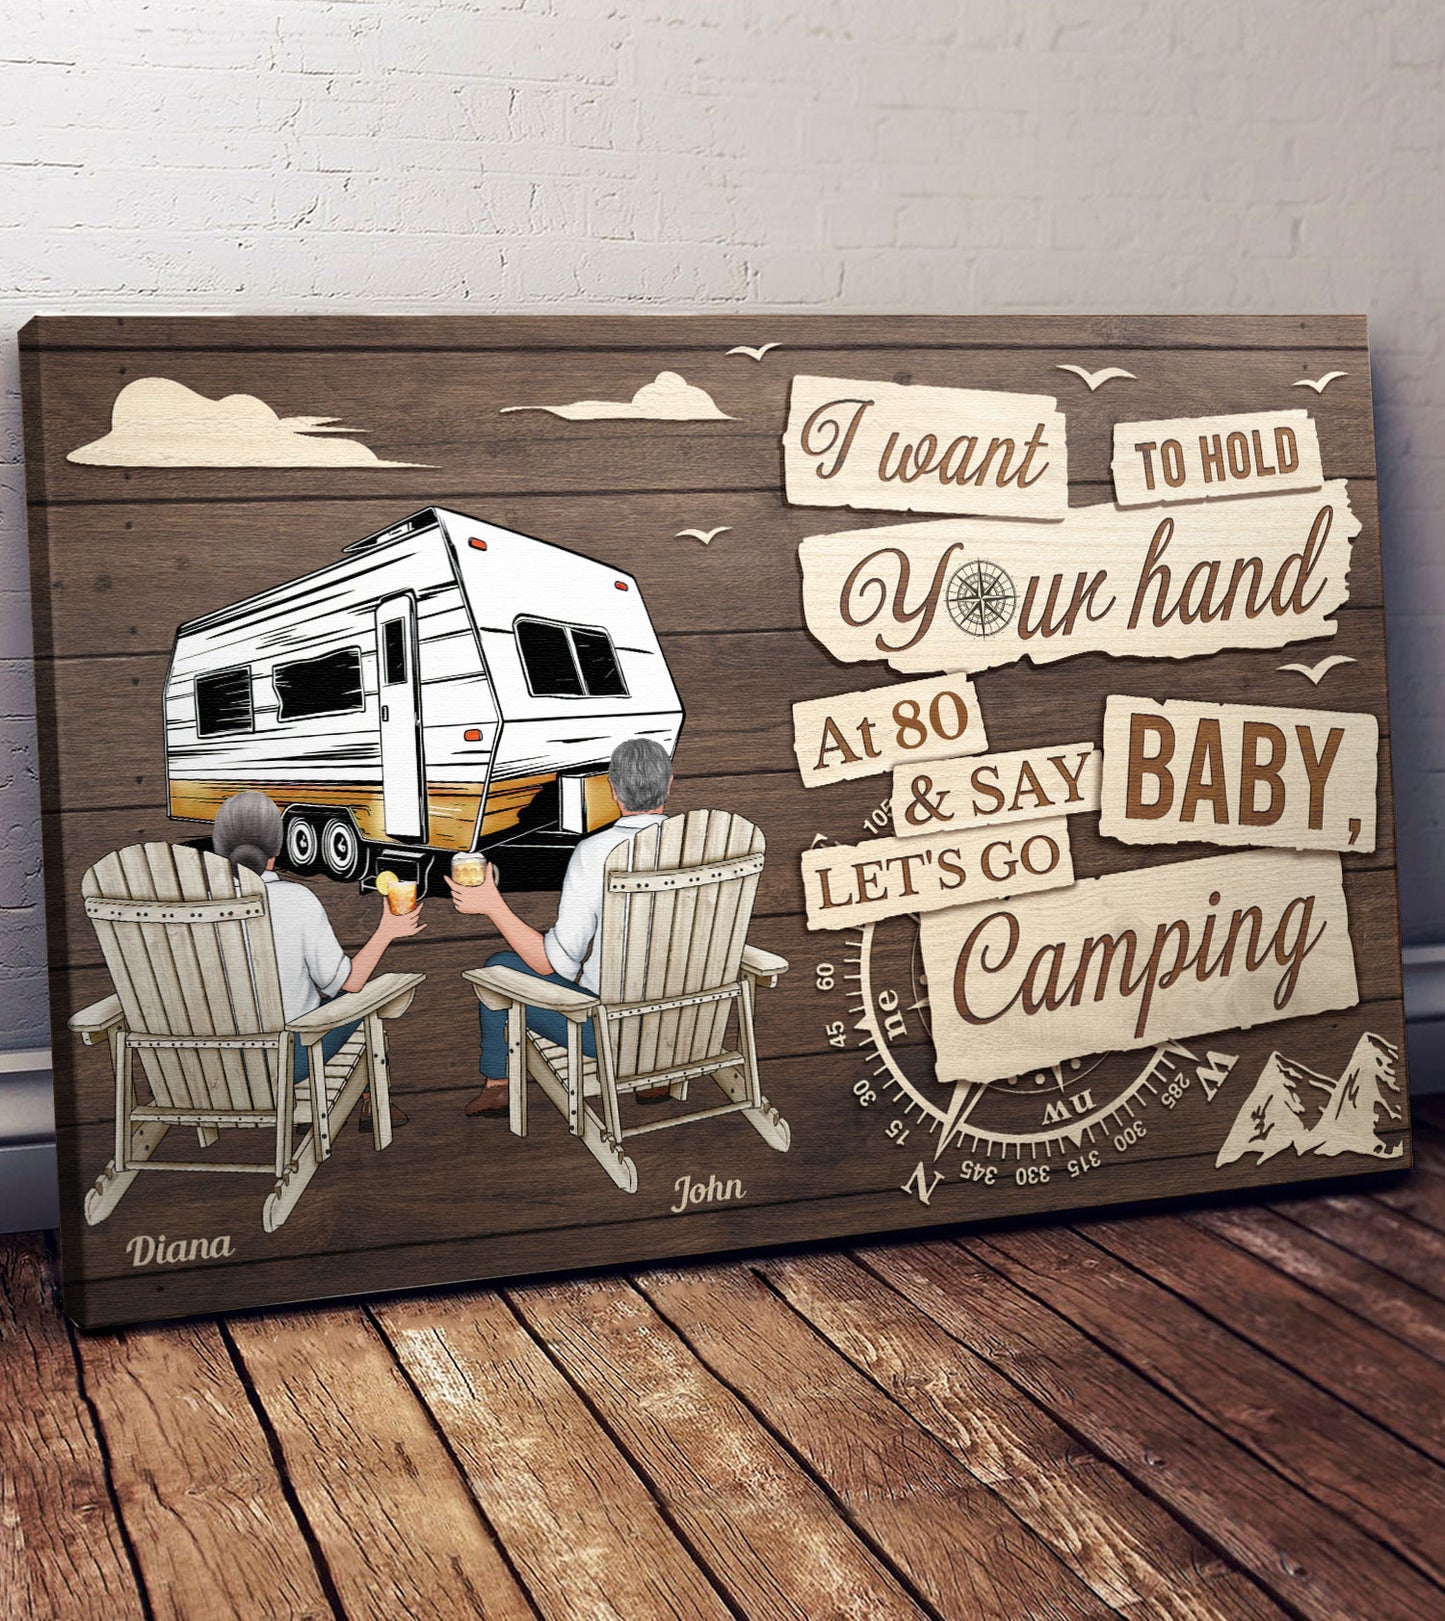 Baby Let's Go Camping At 80 - Personalized Wrapped Canvas